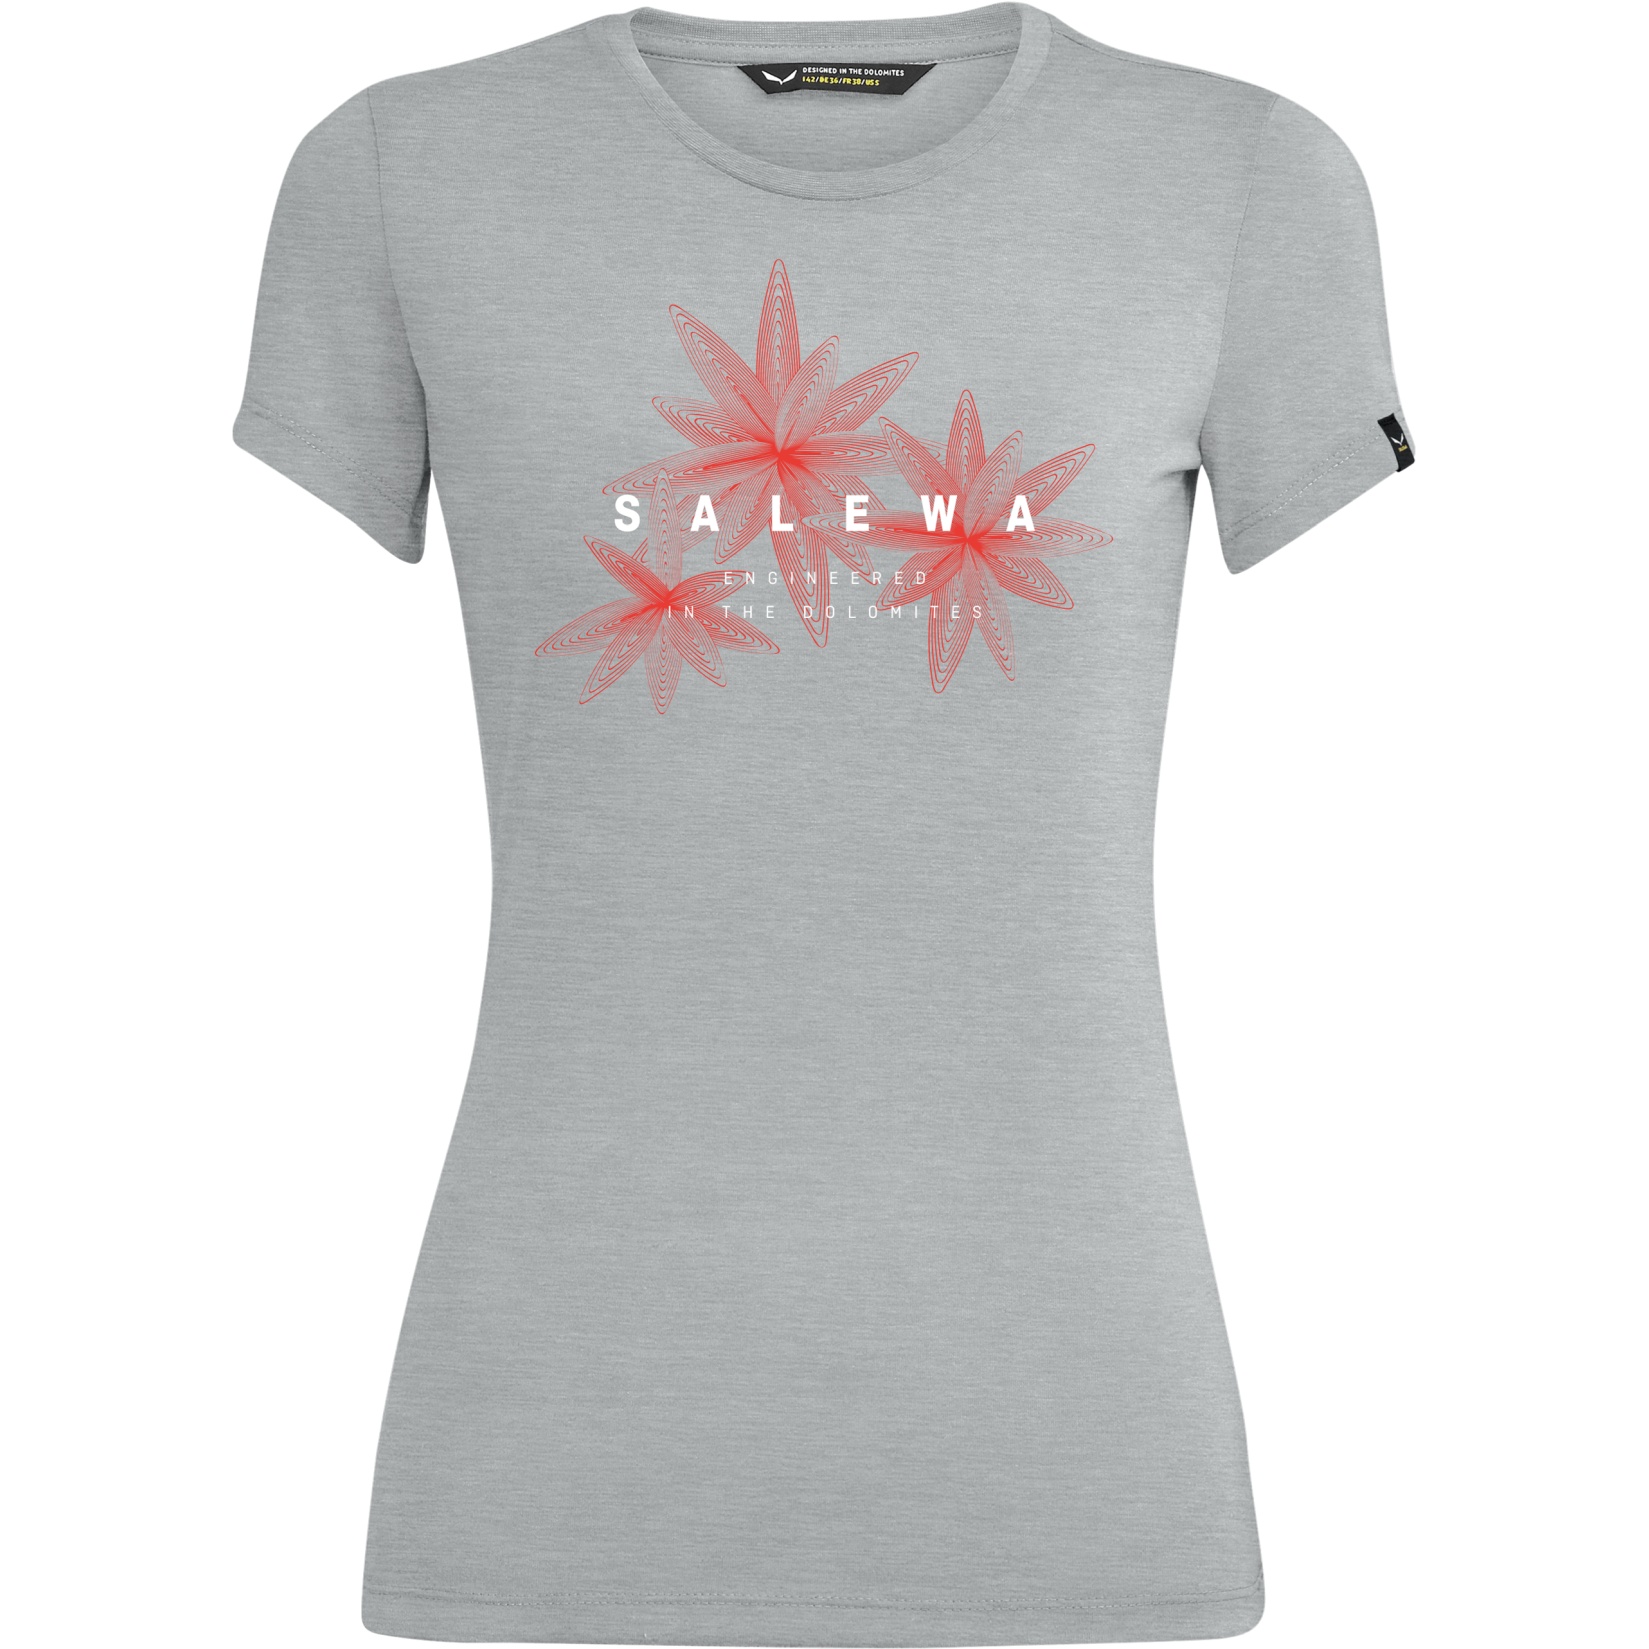 Picture of Salewa Lines Graphic Dry T-Shirt Women - heather grey melange/flowers 626